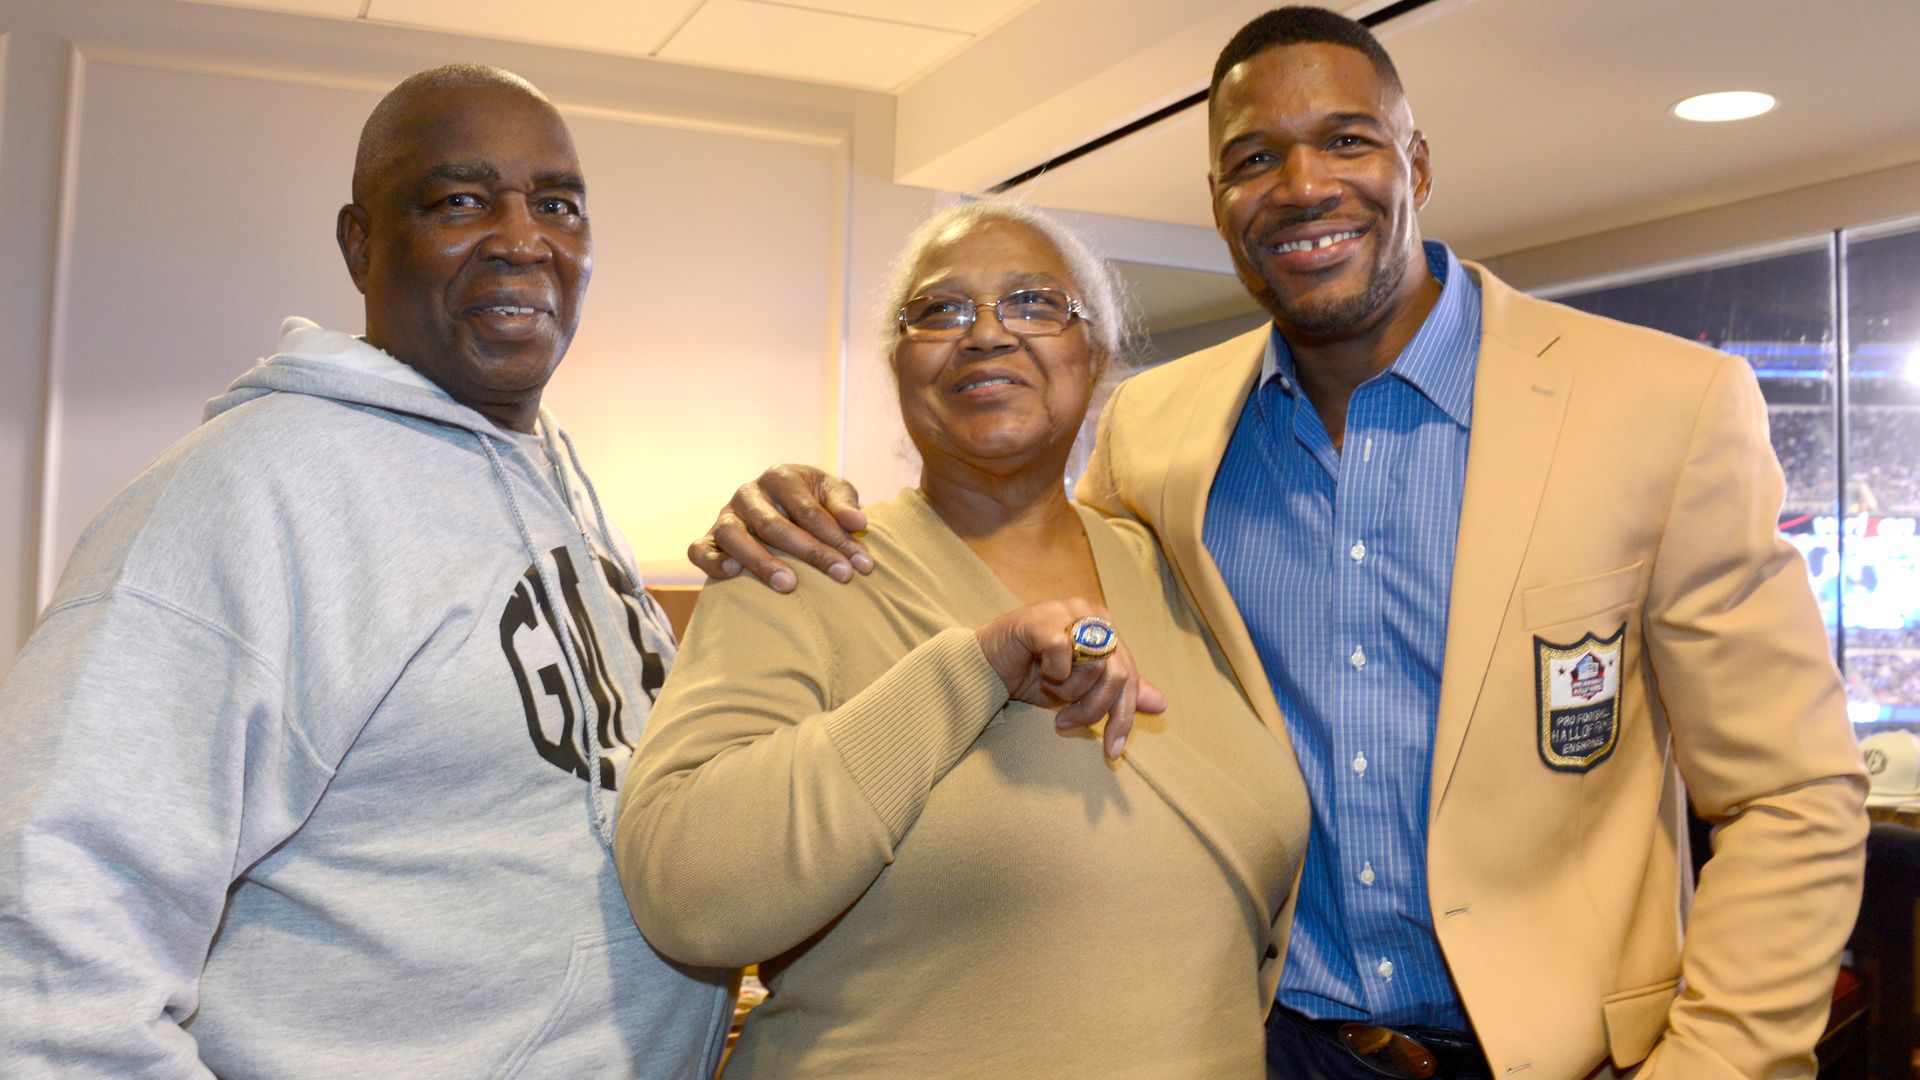 Michael Strahan smiling with his dad Gene Strahan and his mom Louise Strahan in 2014